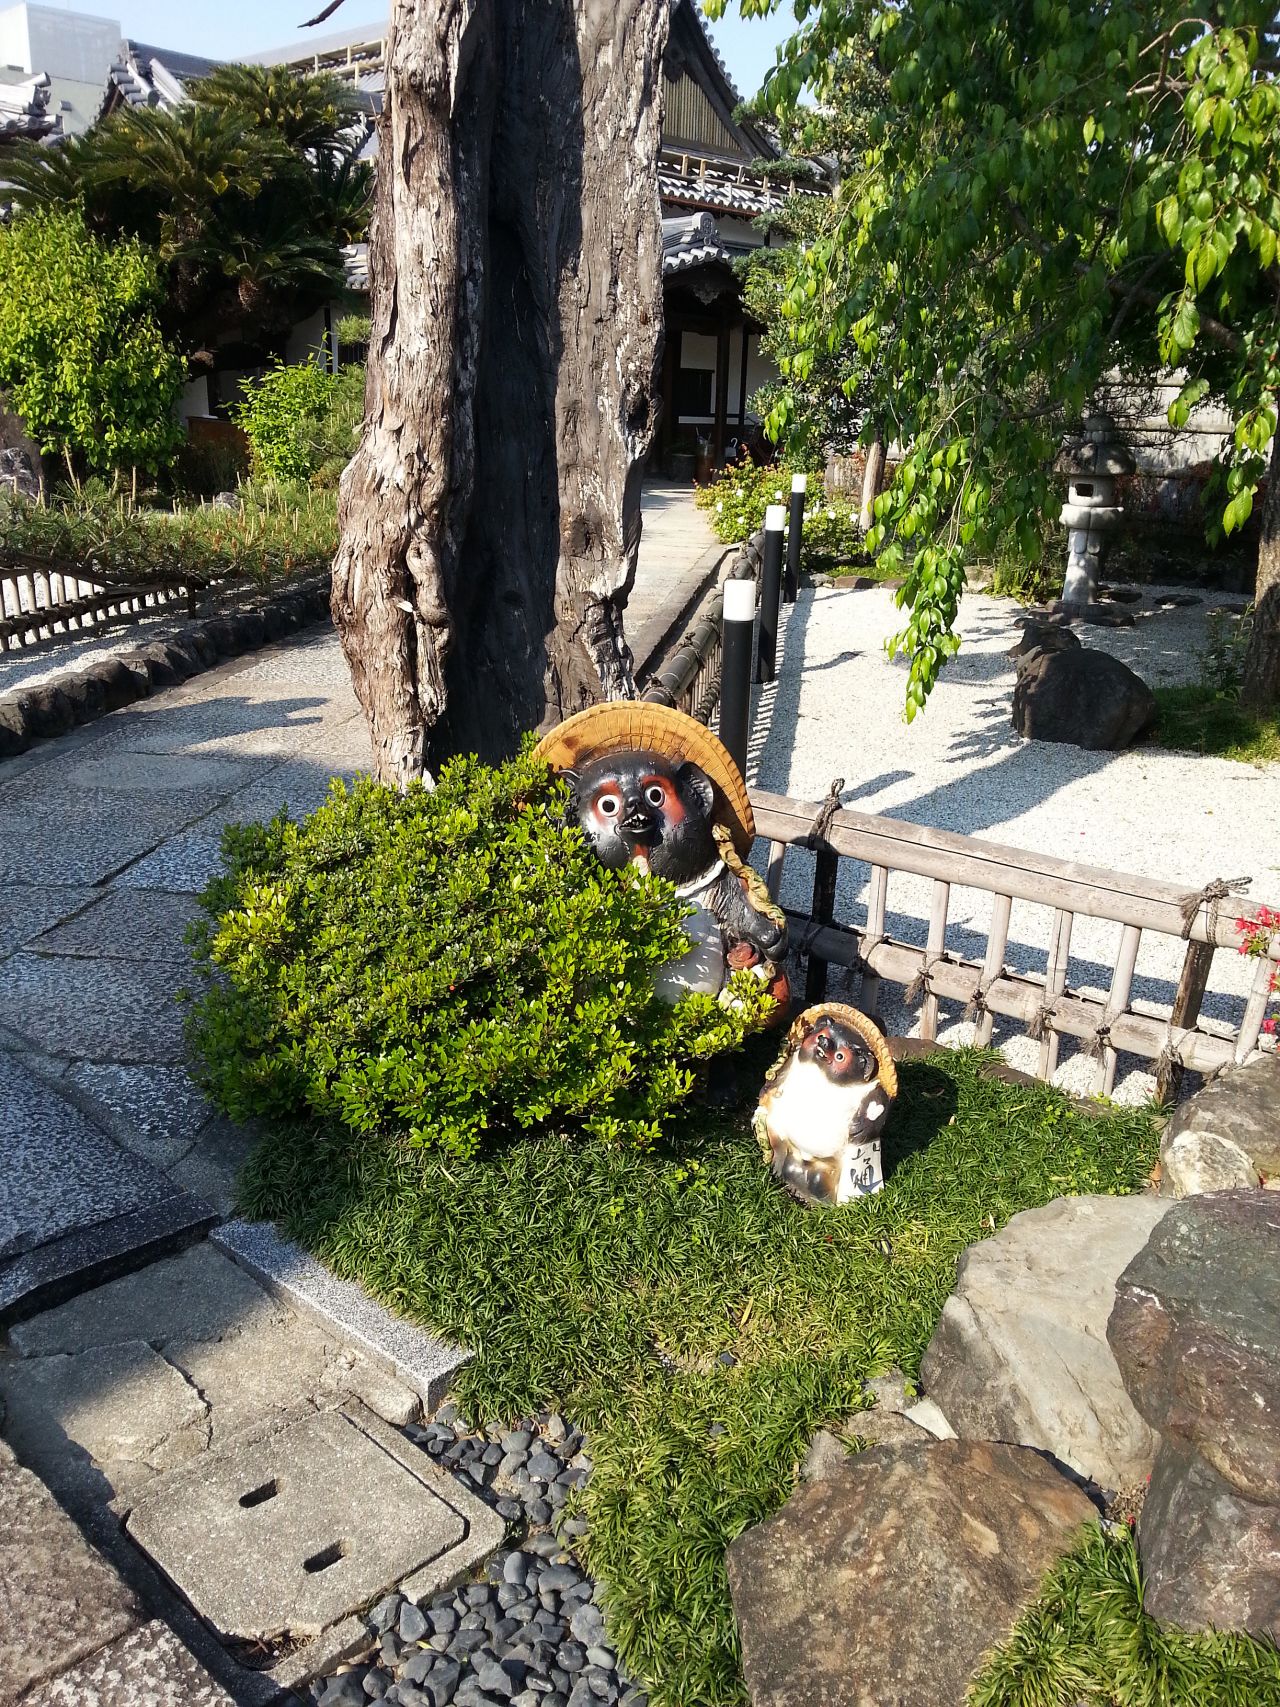 Decorations inside the Jinsenji Temple include Tanuki, or Japanese raccoon dog, a standby element in Japanese folklore. The tanuki is believed to ward off evil and bring luck.